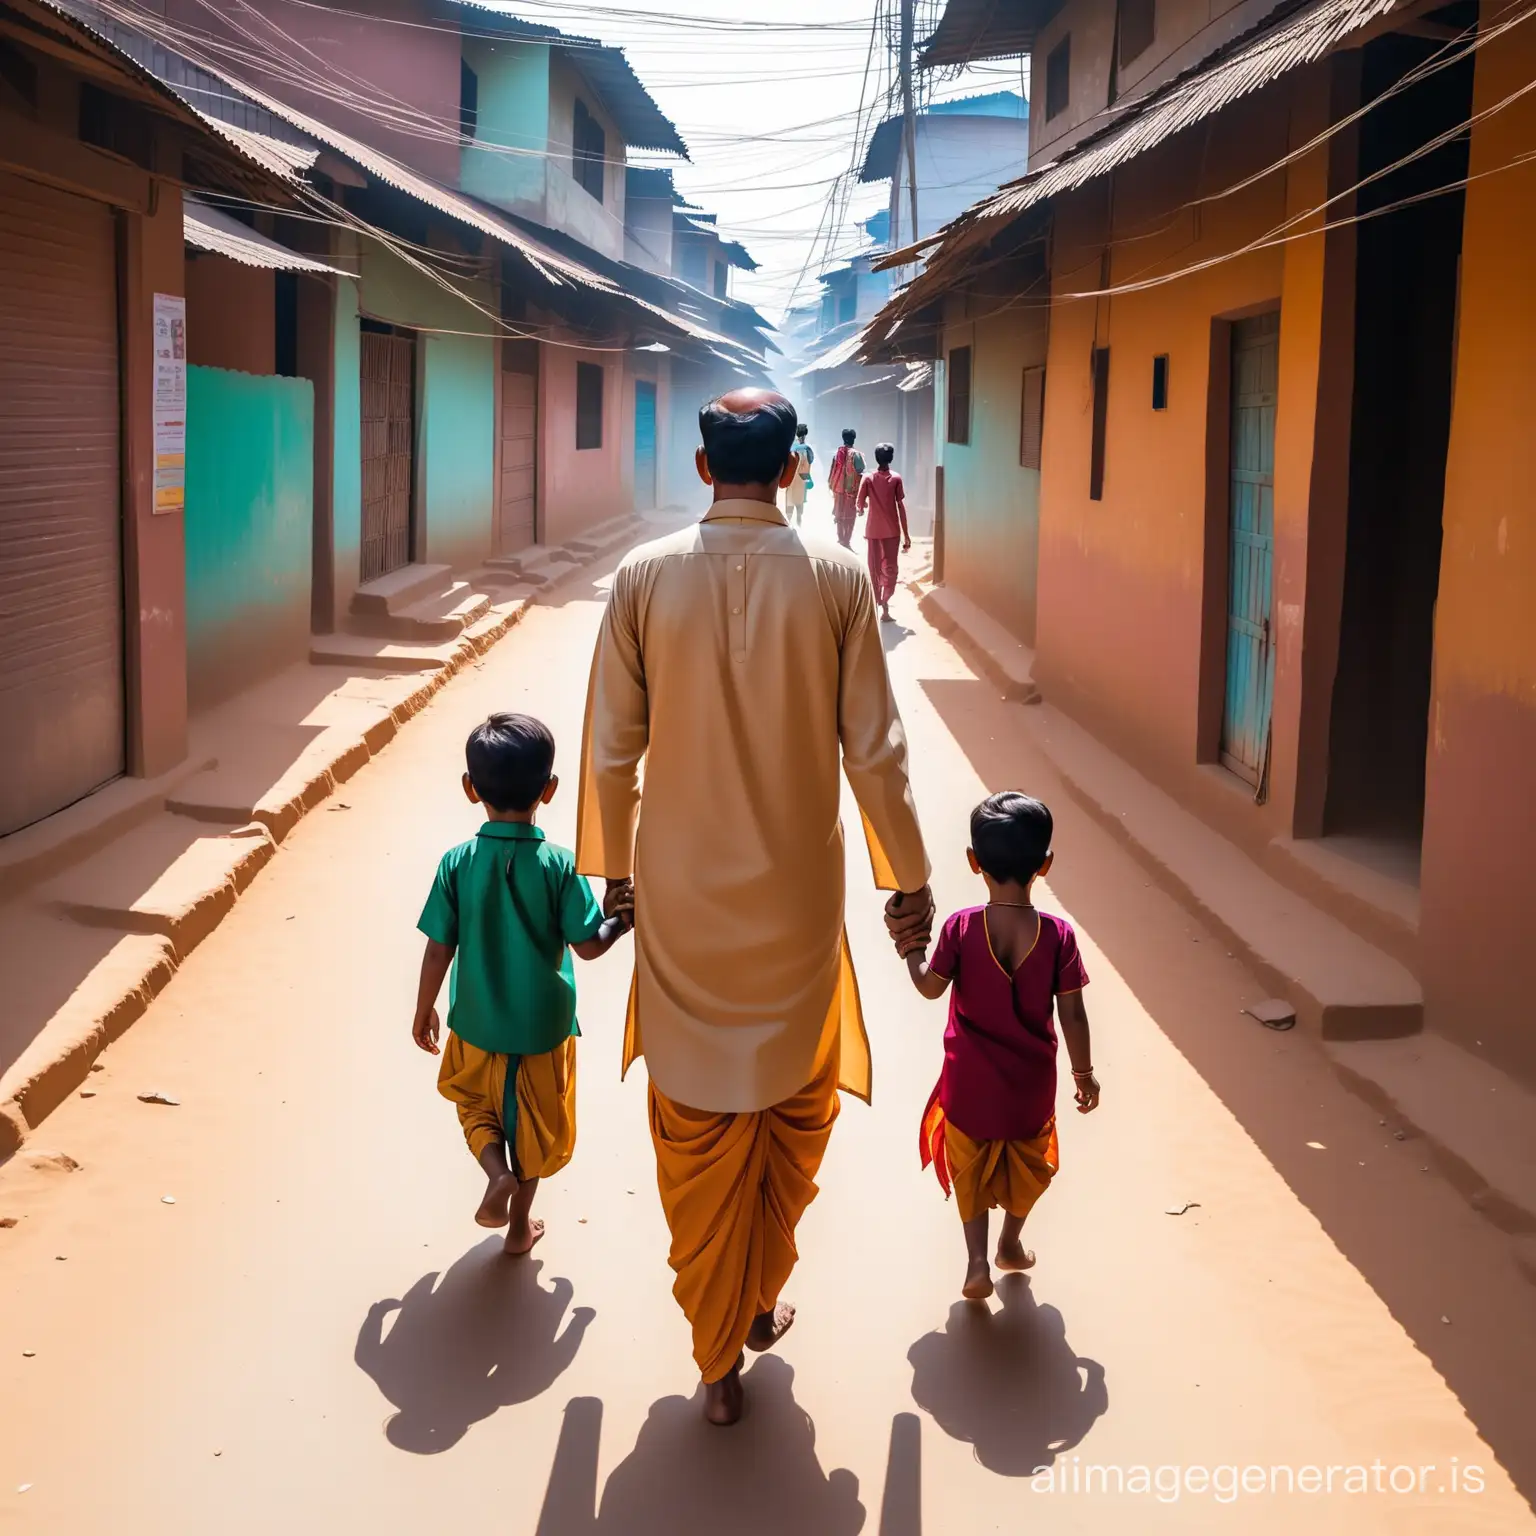 behind the camera An indian man walking with two child